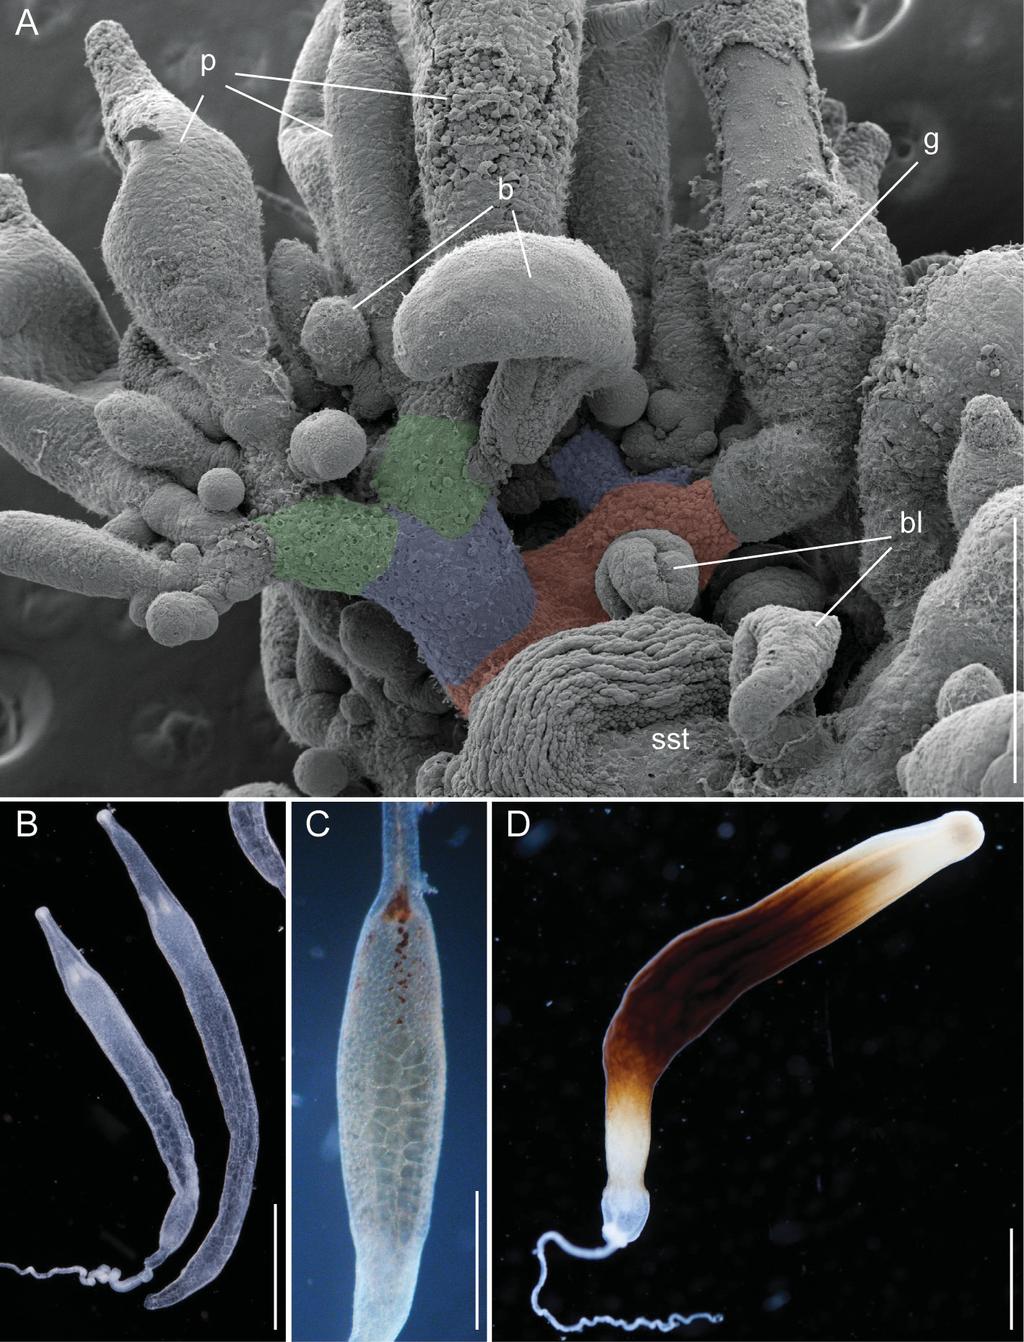 FIGURE 15. Apolemia rubriversa sp. nov. Palpons, gastrozooids and siphosomal organization of the holotype (A,C) and specimen D195 (B, D) (fixed tissue).